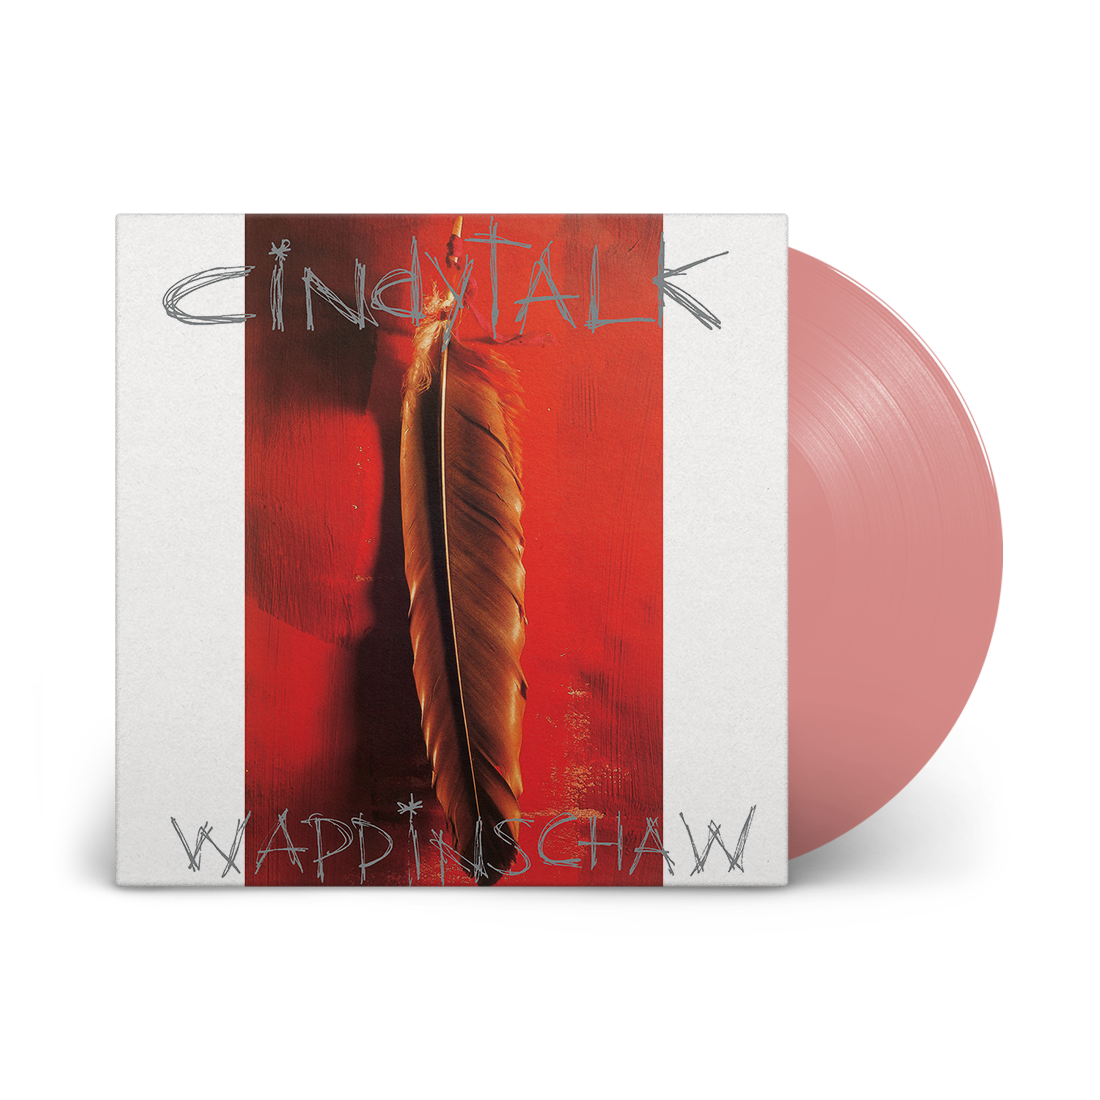 Wappinschaw: Limited Edition Clear Red Vinyl LP